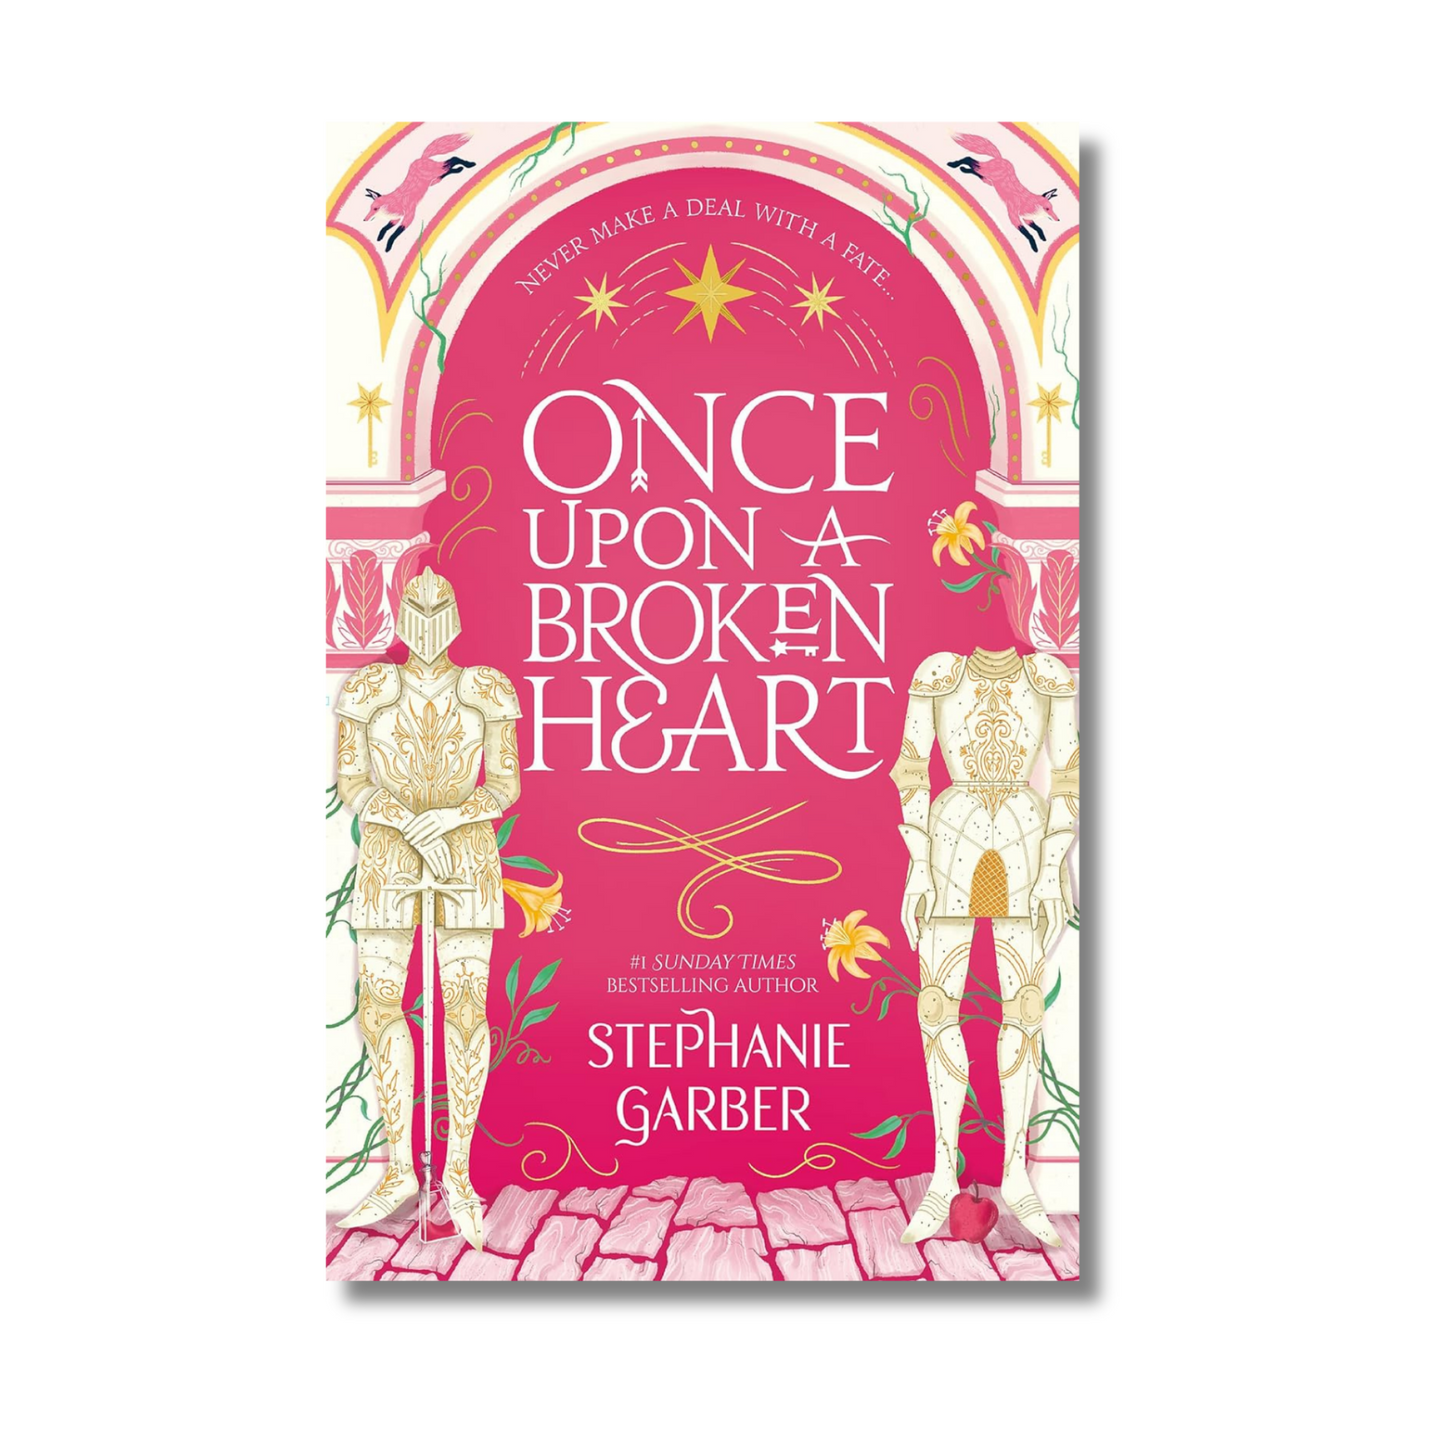 Once Upon A Broken Heart by Stephanie Garber (Paperback)